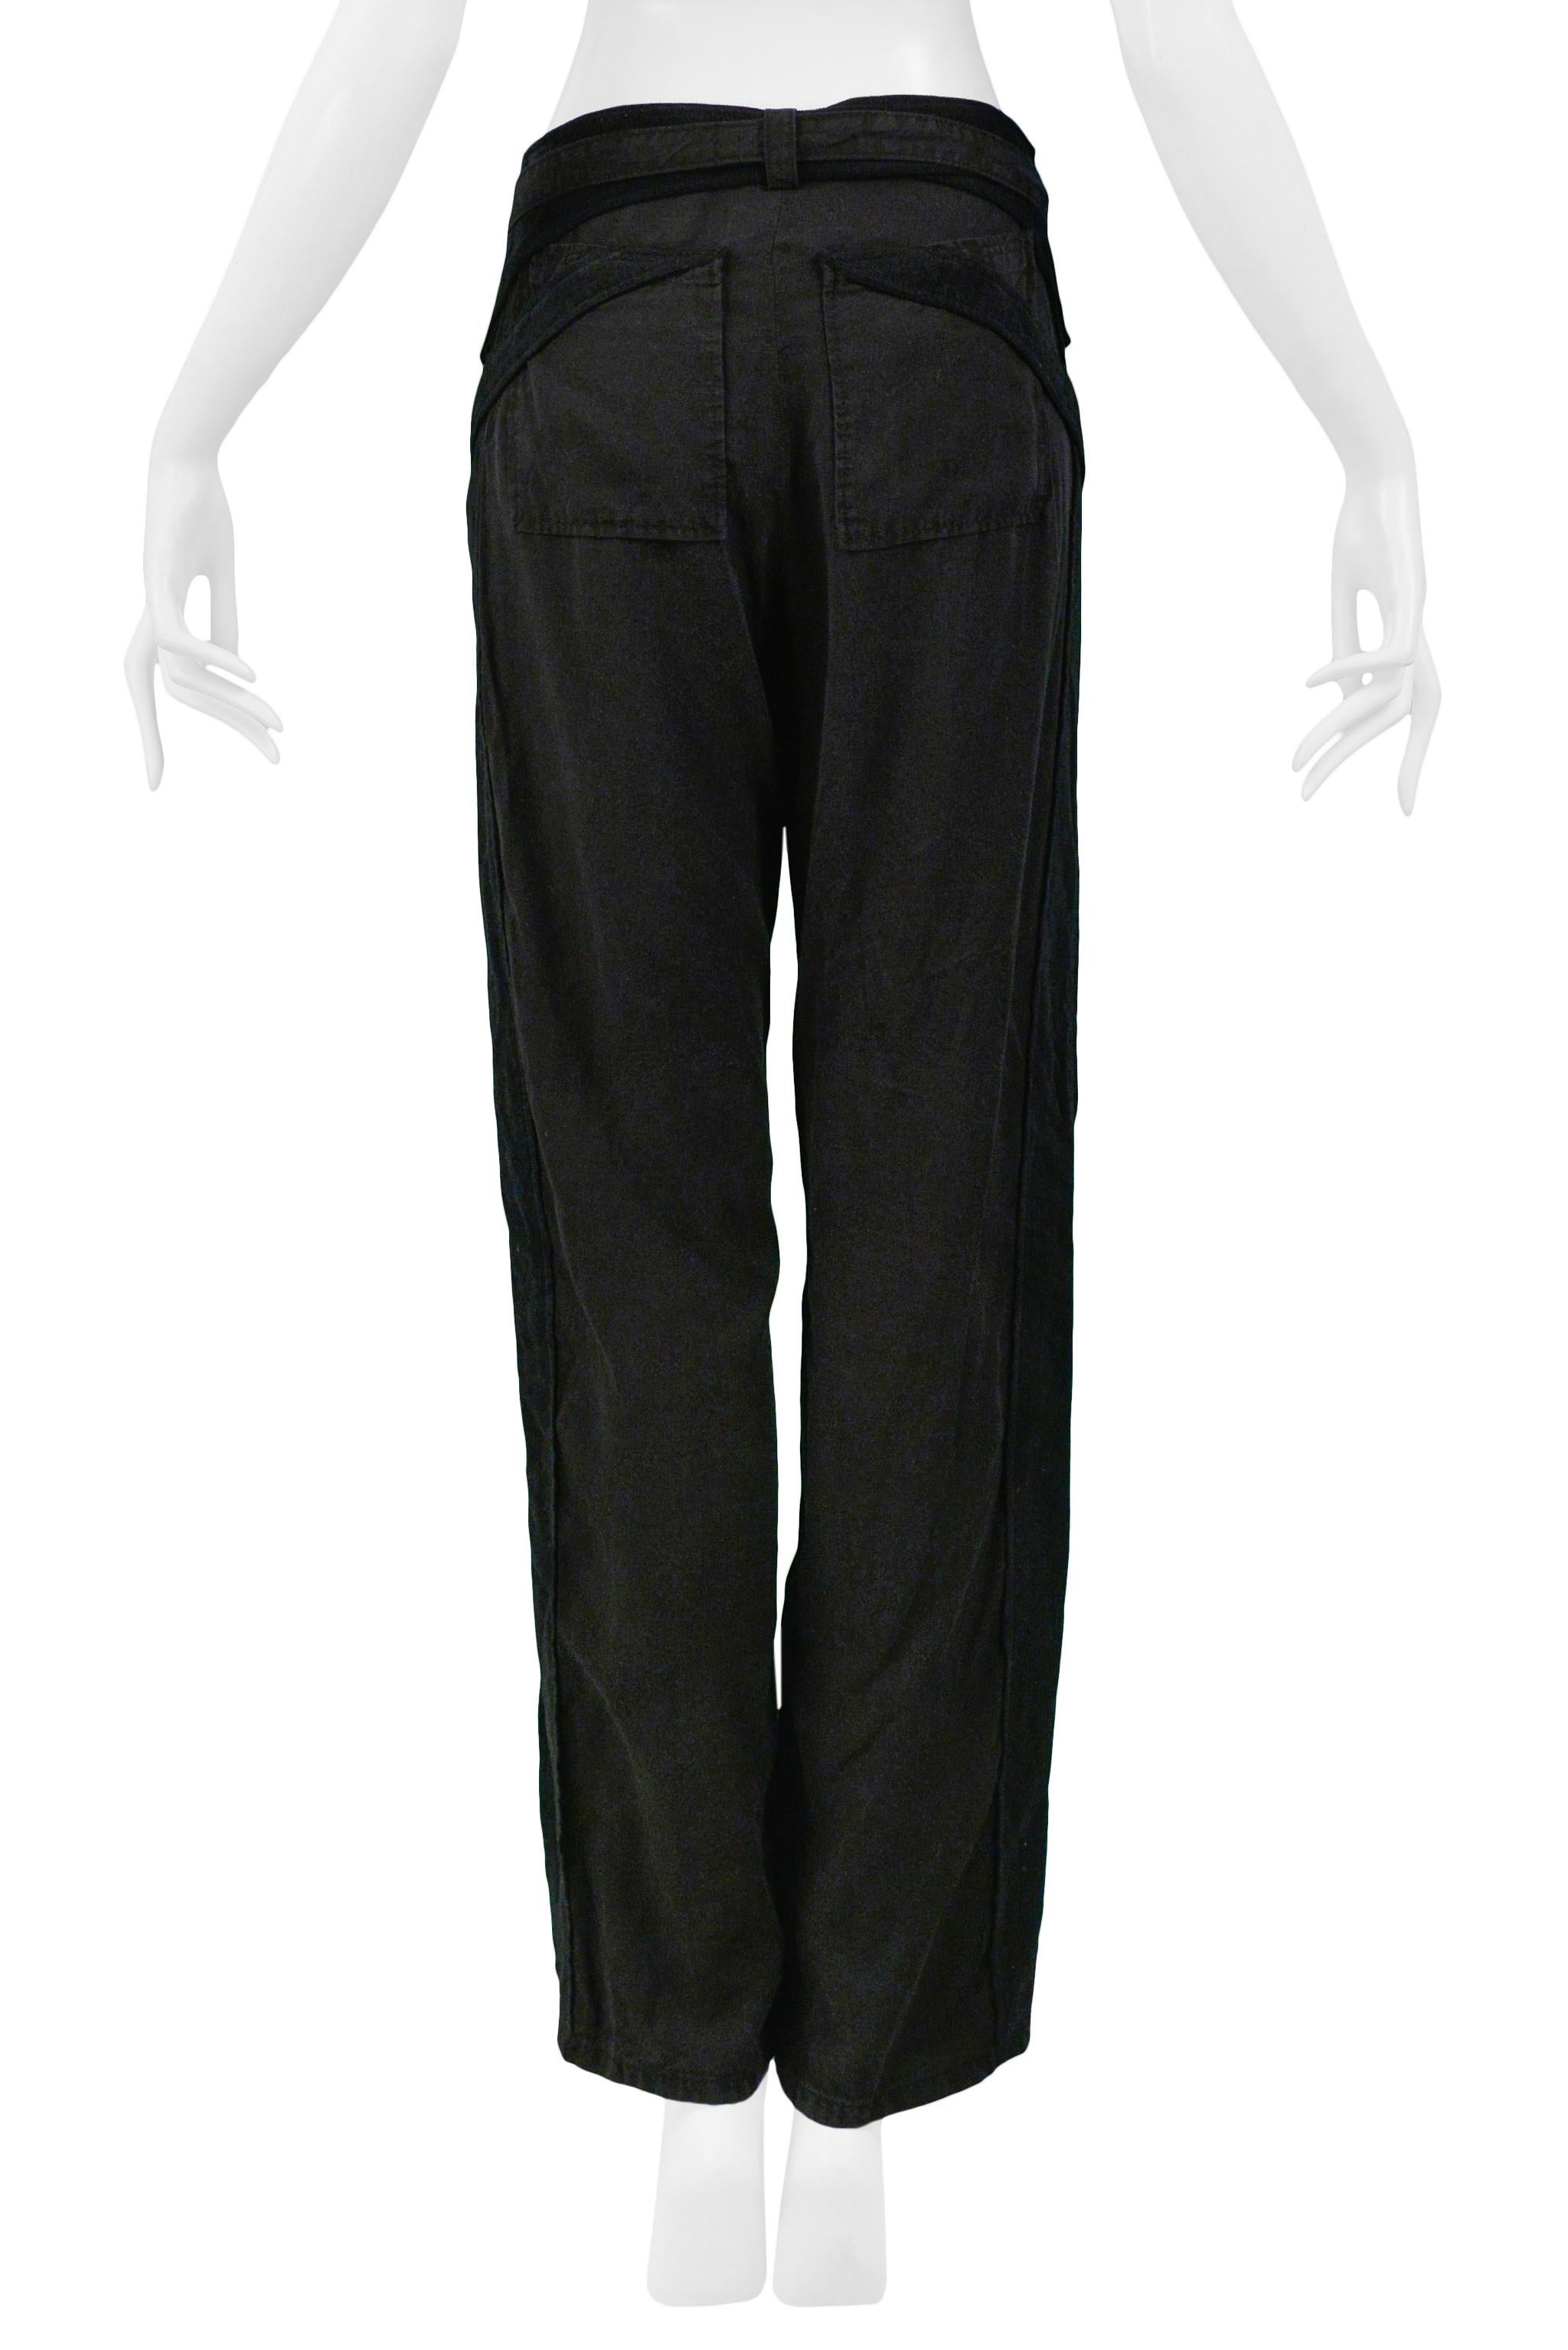 Iconic Balenciaga by Ghesquiere Black Cargo Pants 2002 In Excellent Condition In Los Angeles, CA